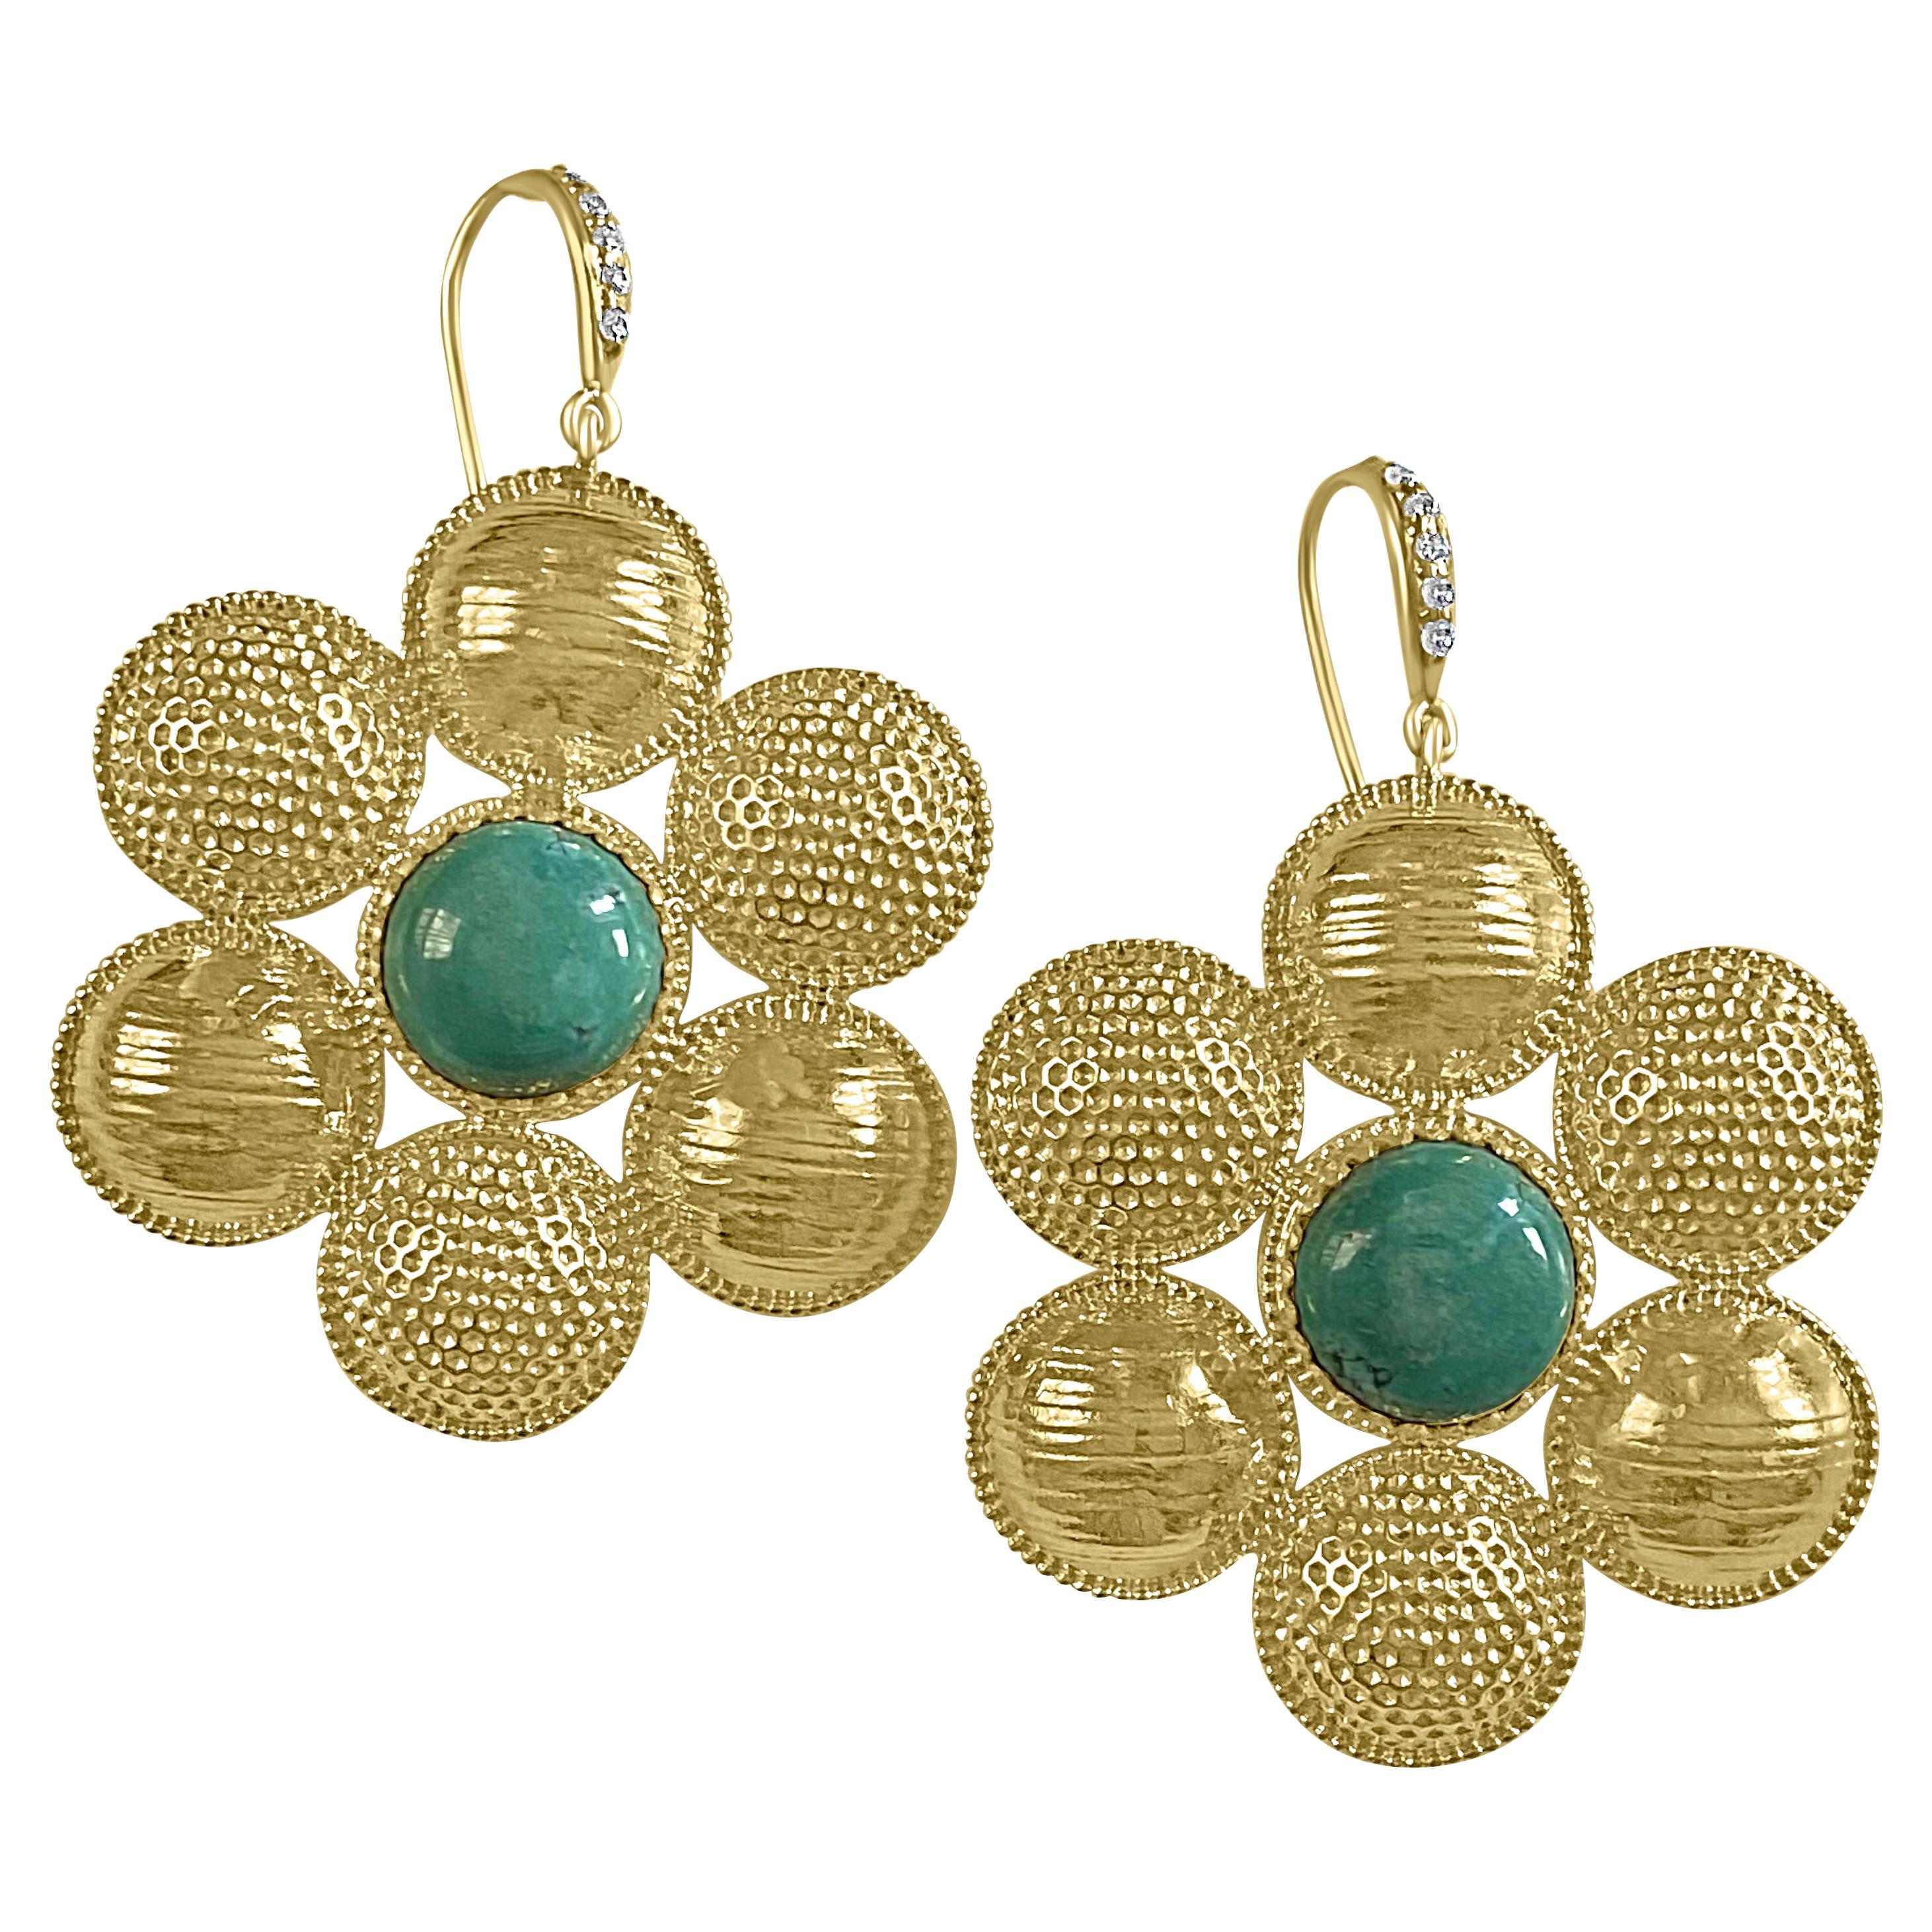 Twin Elegance Turquoise Circle Cluster Statement Earrings